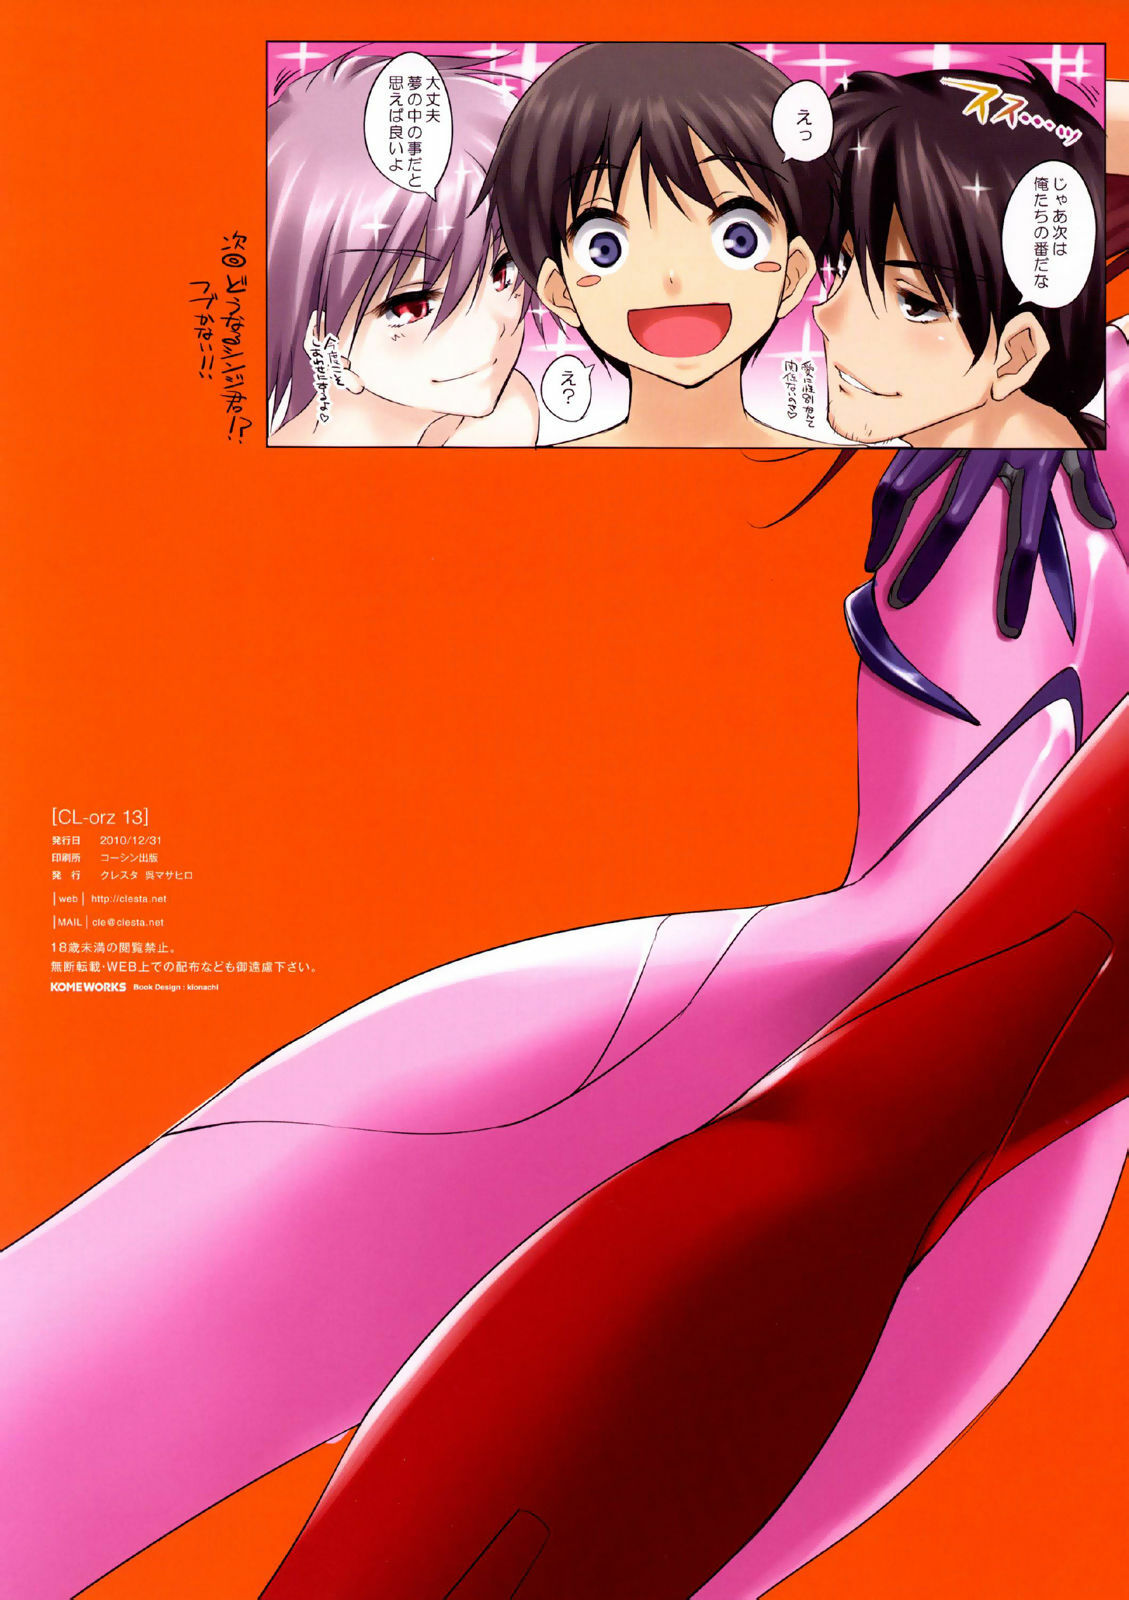 (C79) [clesta (Cle Masahiro)] CL-orz: 13 - YOU CAN (NOT) ADVANCE. (Rebuild of Evangelion) [Decensored] page 15 full